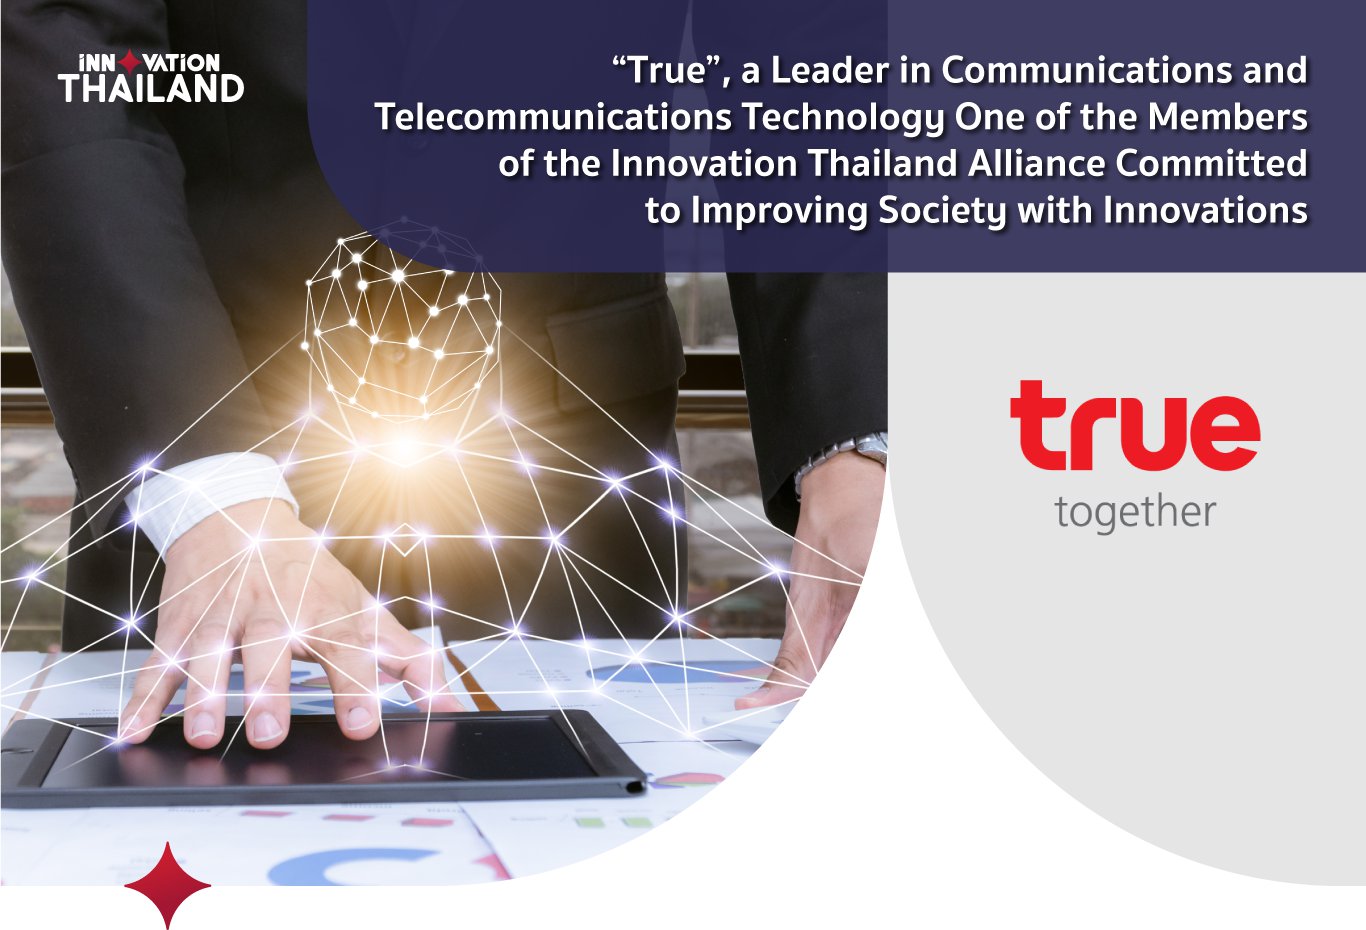 True a Leader in Communications and Telecommunications Technology One of the Members of the Innovation Thailand Alliance Committed to Improving Society with Innovations